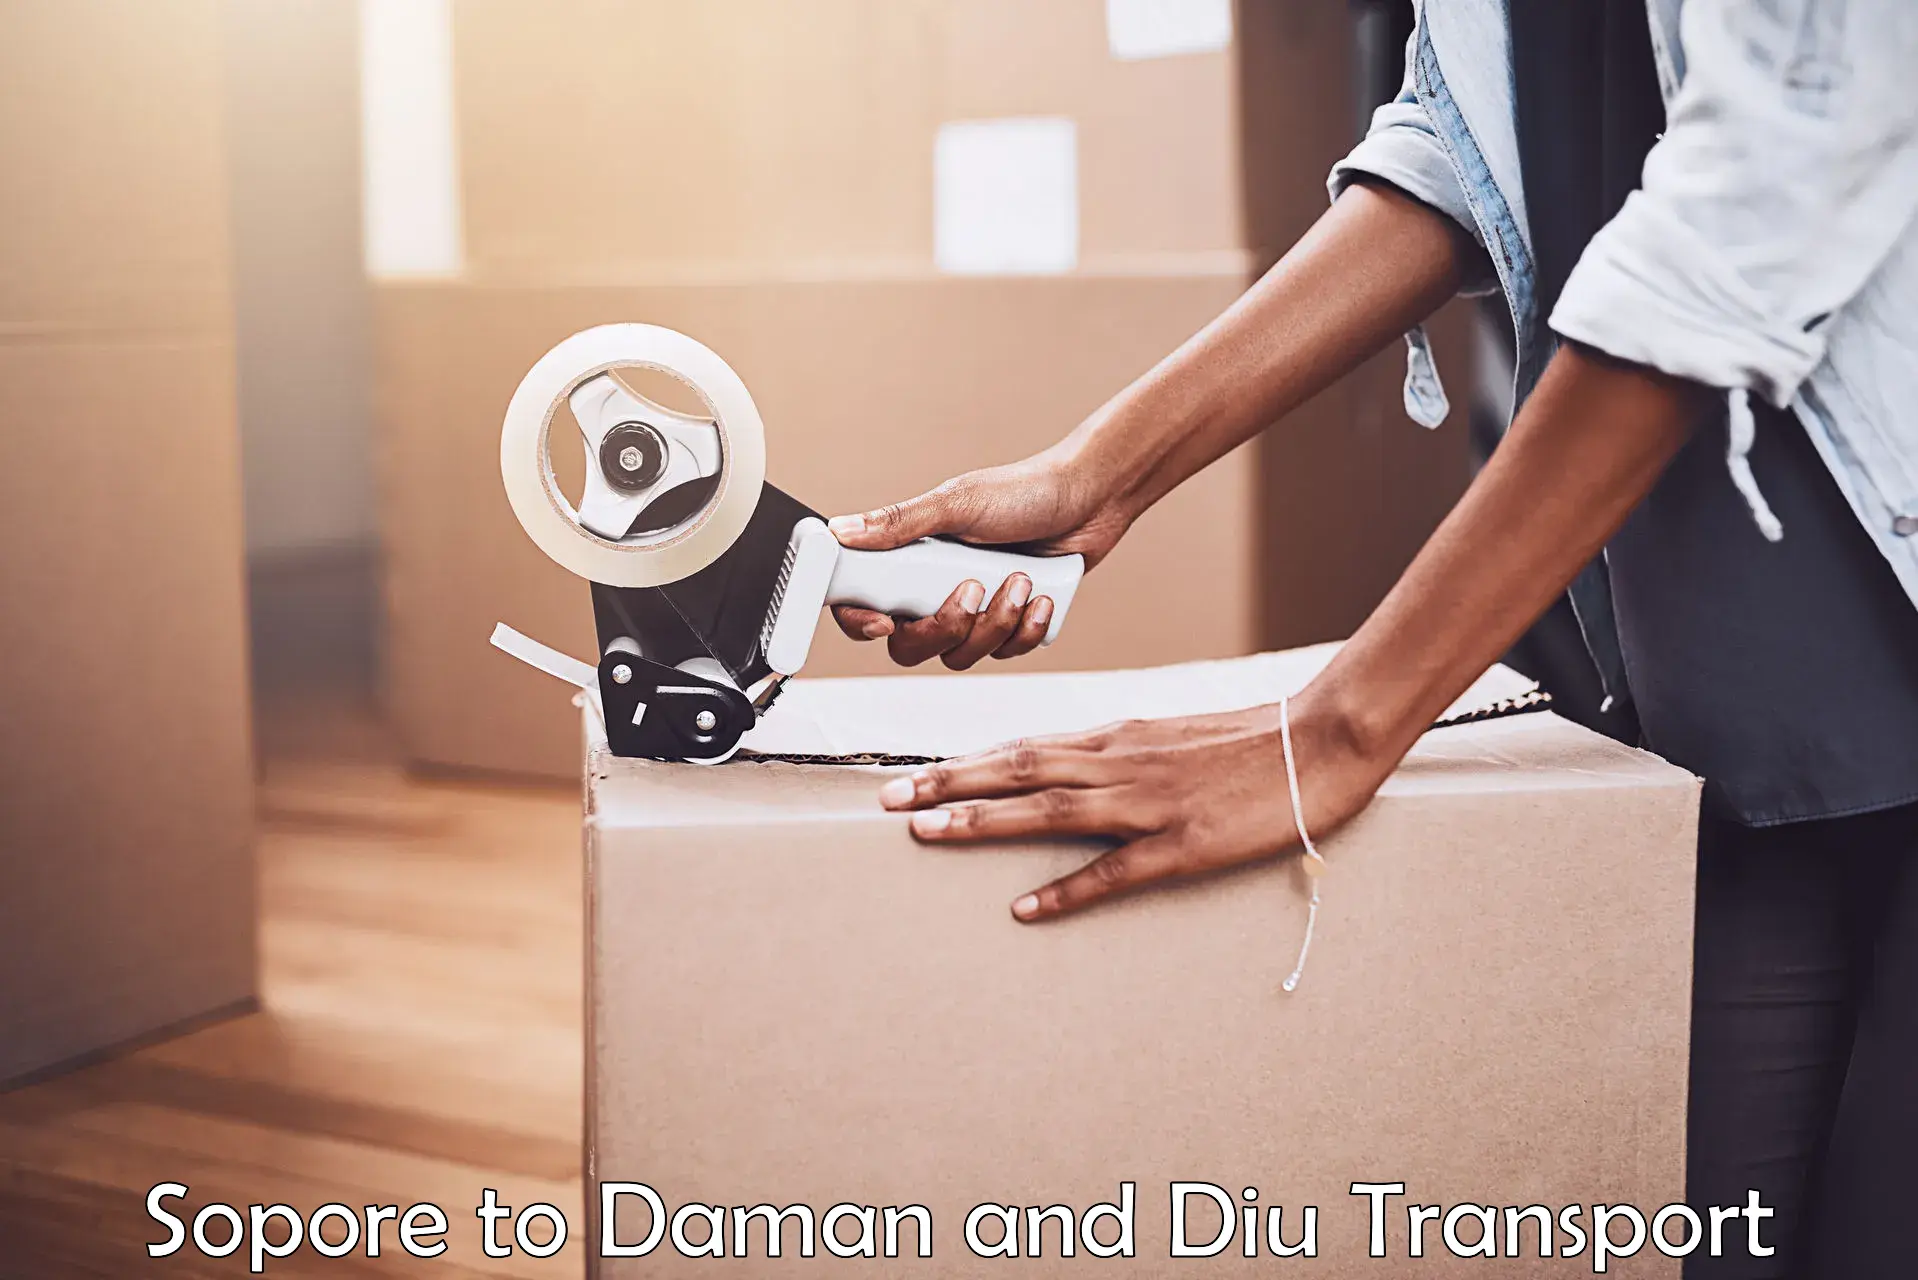 Road transport online services Sopore to Daman and Diu